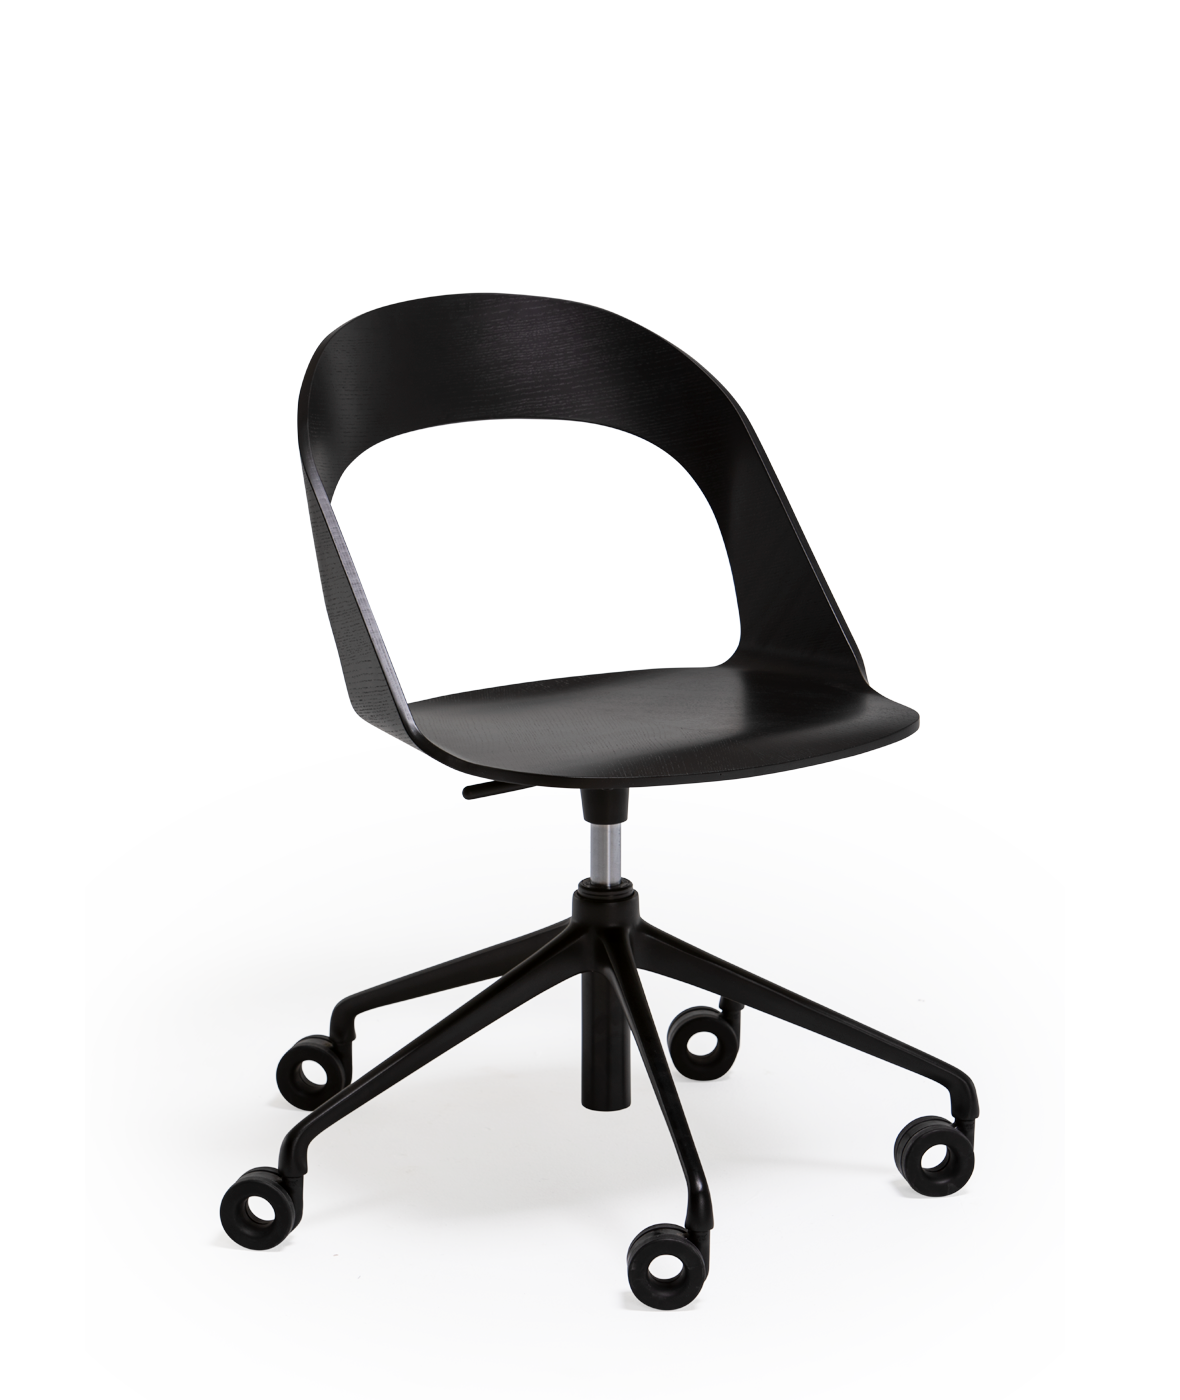 Vergés - Goose chair Model D with swivel base and gas lift, 5 rollers